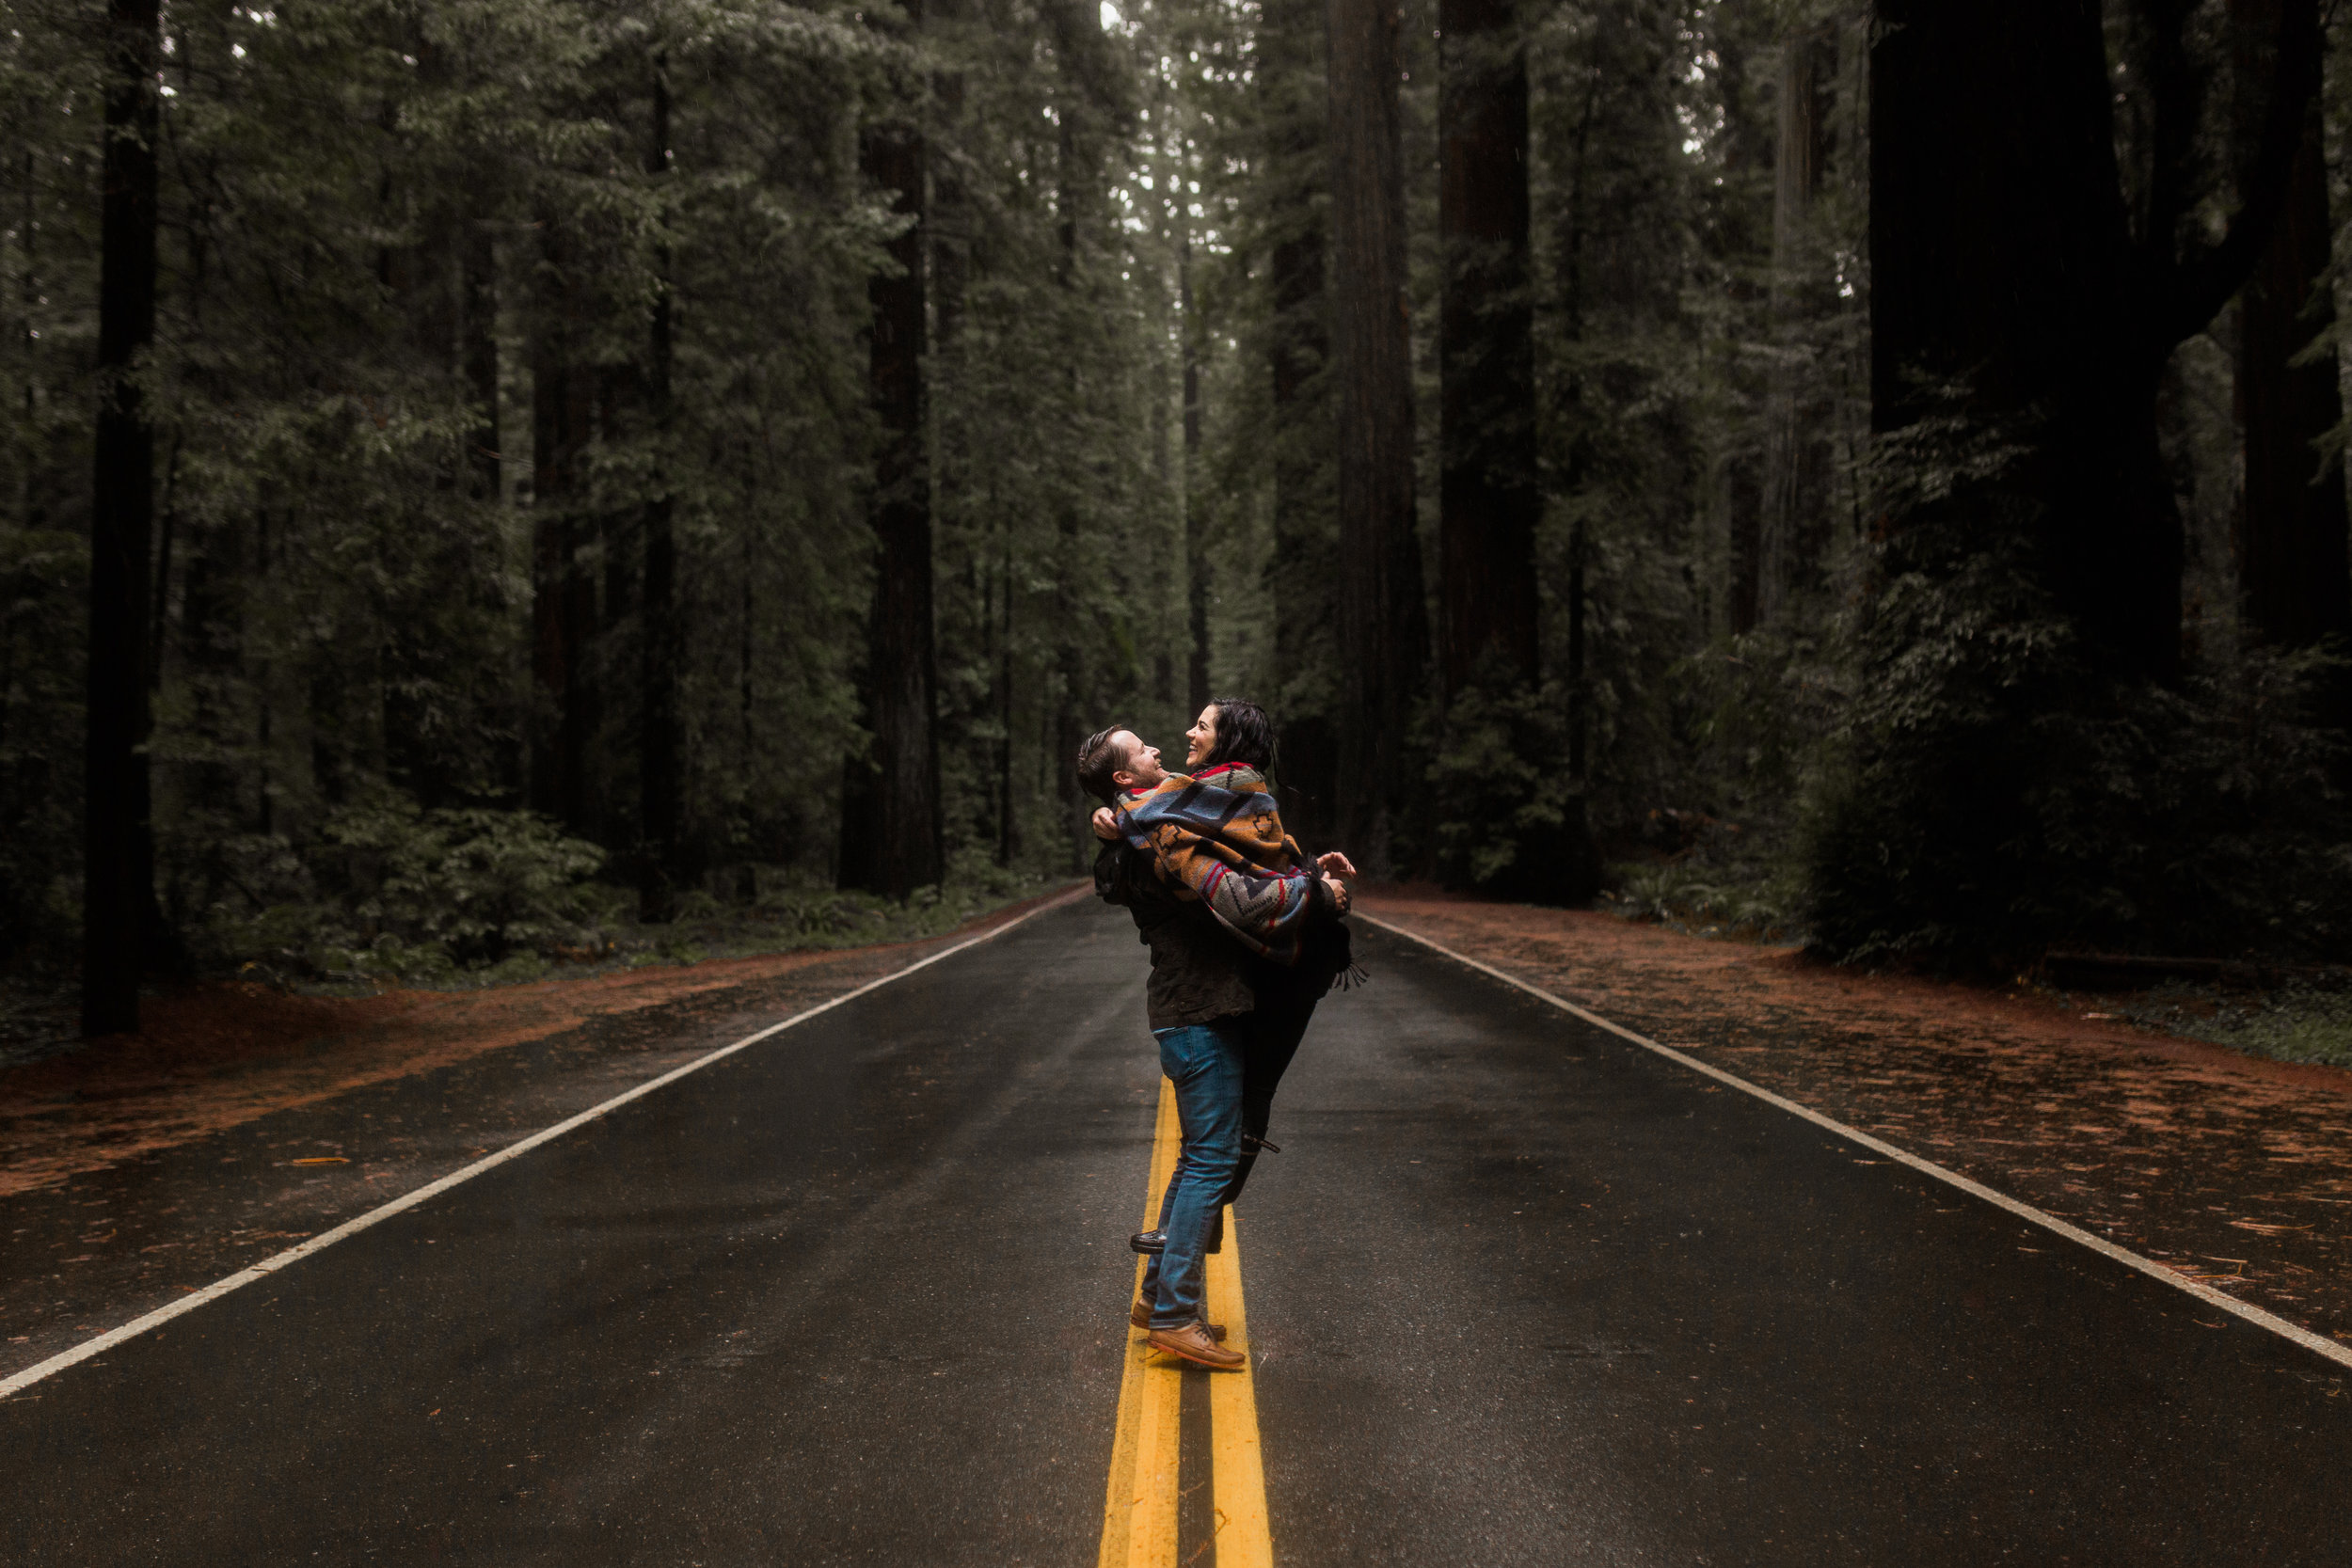 nicole-daacke-photography-redwoods-national-park-forest-rainy-foggy-adventure-engagement-session-humboldt-county-old-growth-redwood-tree-elopement-intimate-wedding-photographer-28.jpg